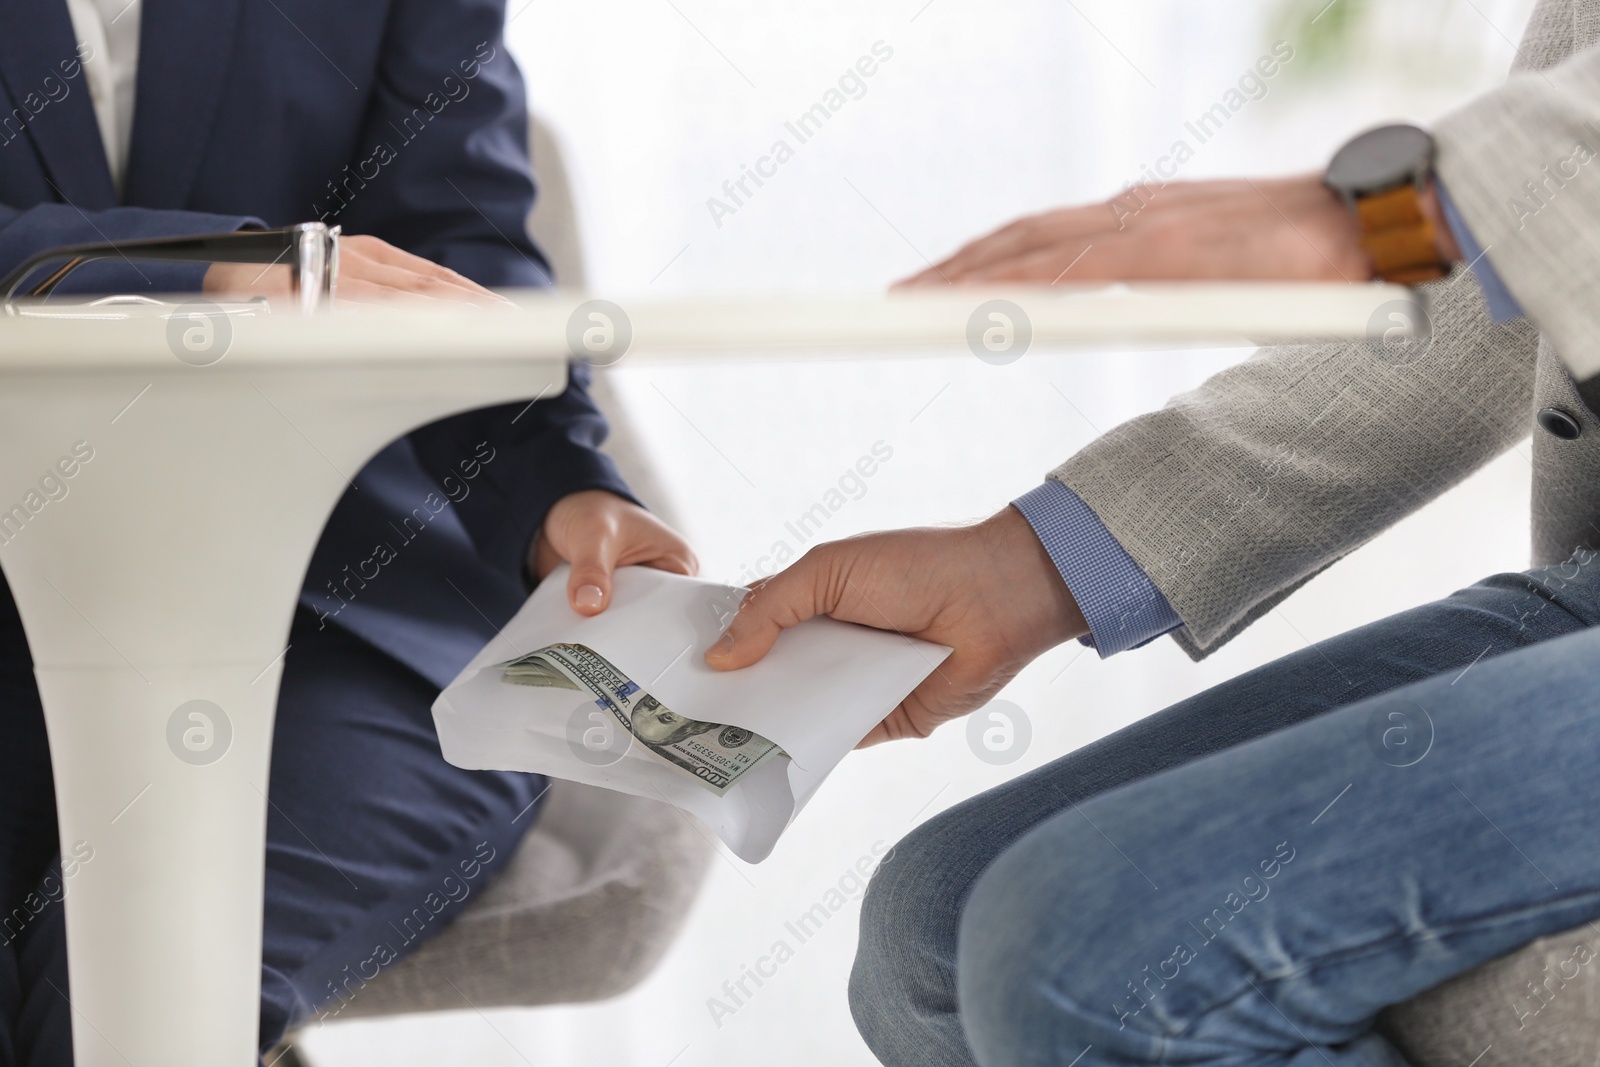 Photo of Man giving bribe to woman under table in office, closeup